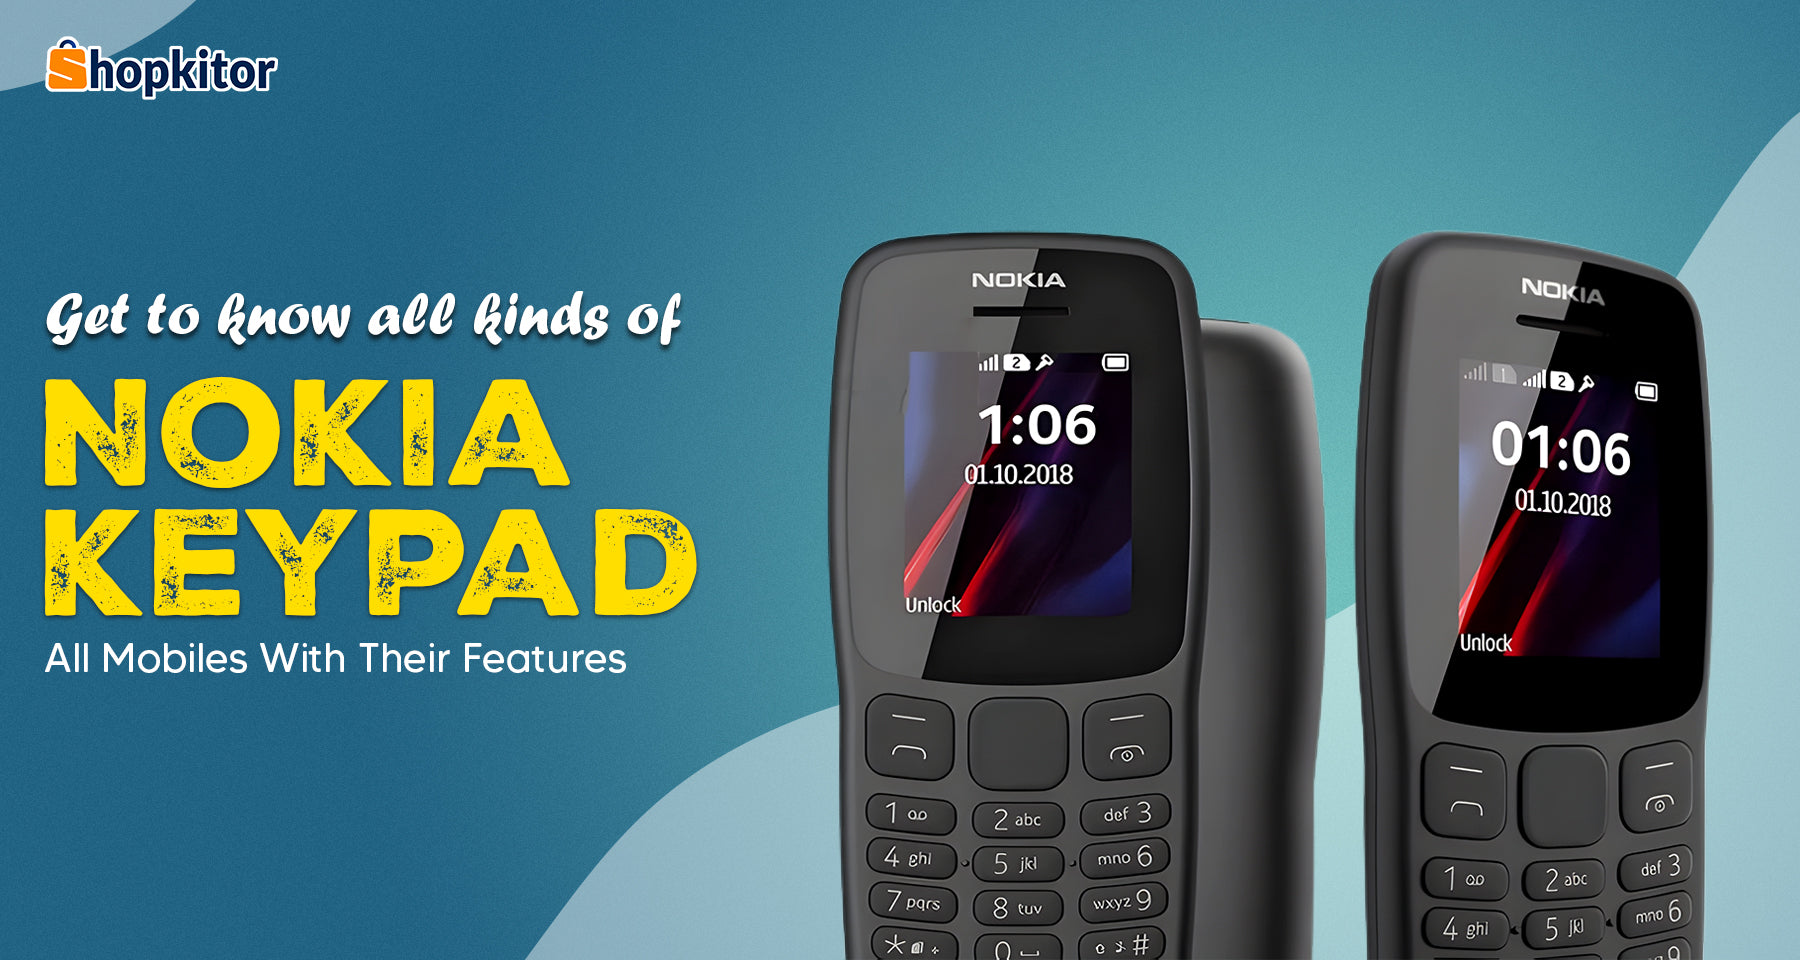 Get to know all kinds of Nokia keypad all mobiles with their features